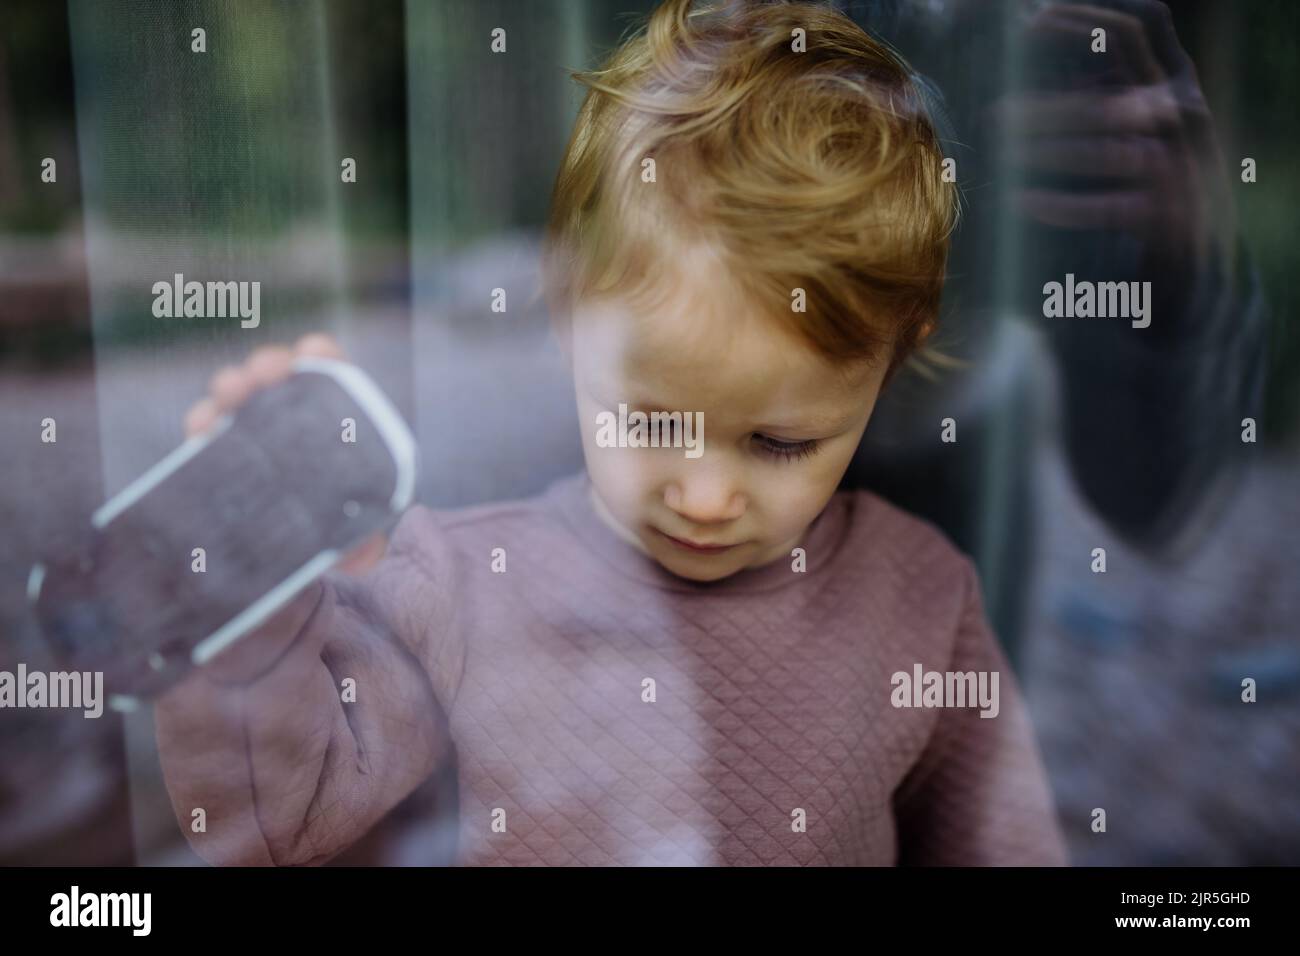 Little child standing alone with car toy behind the window, photo trough glass. Stock Photo